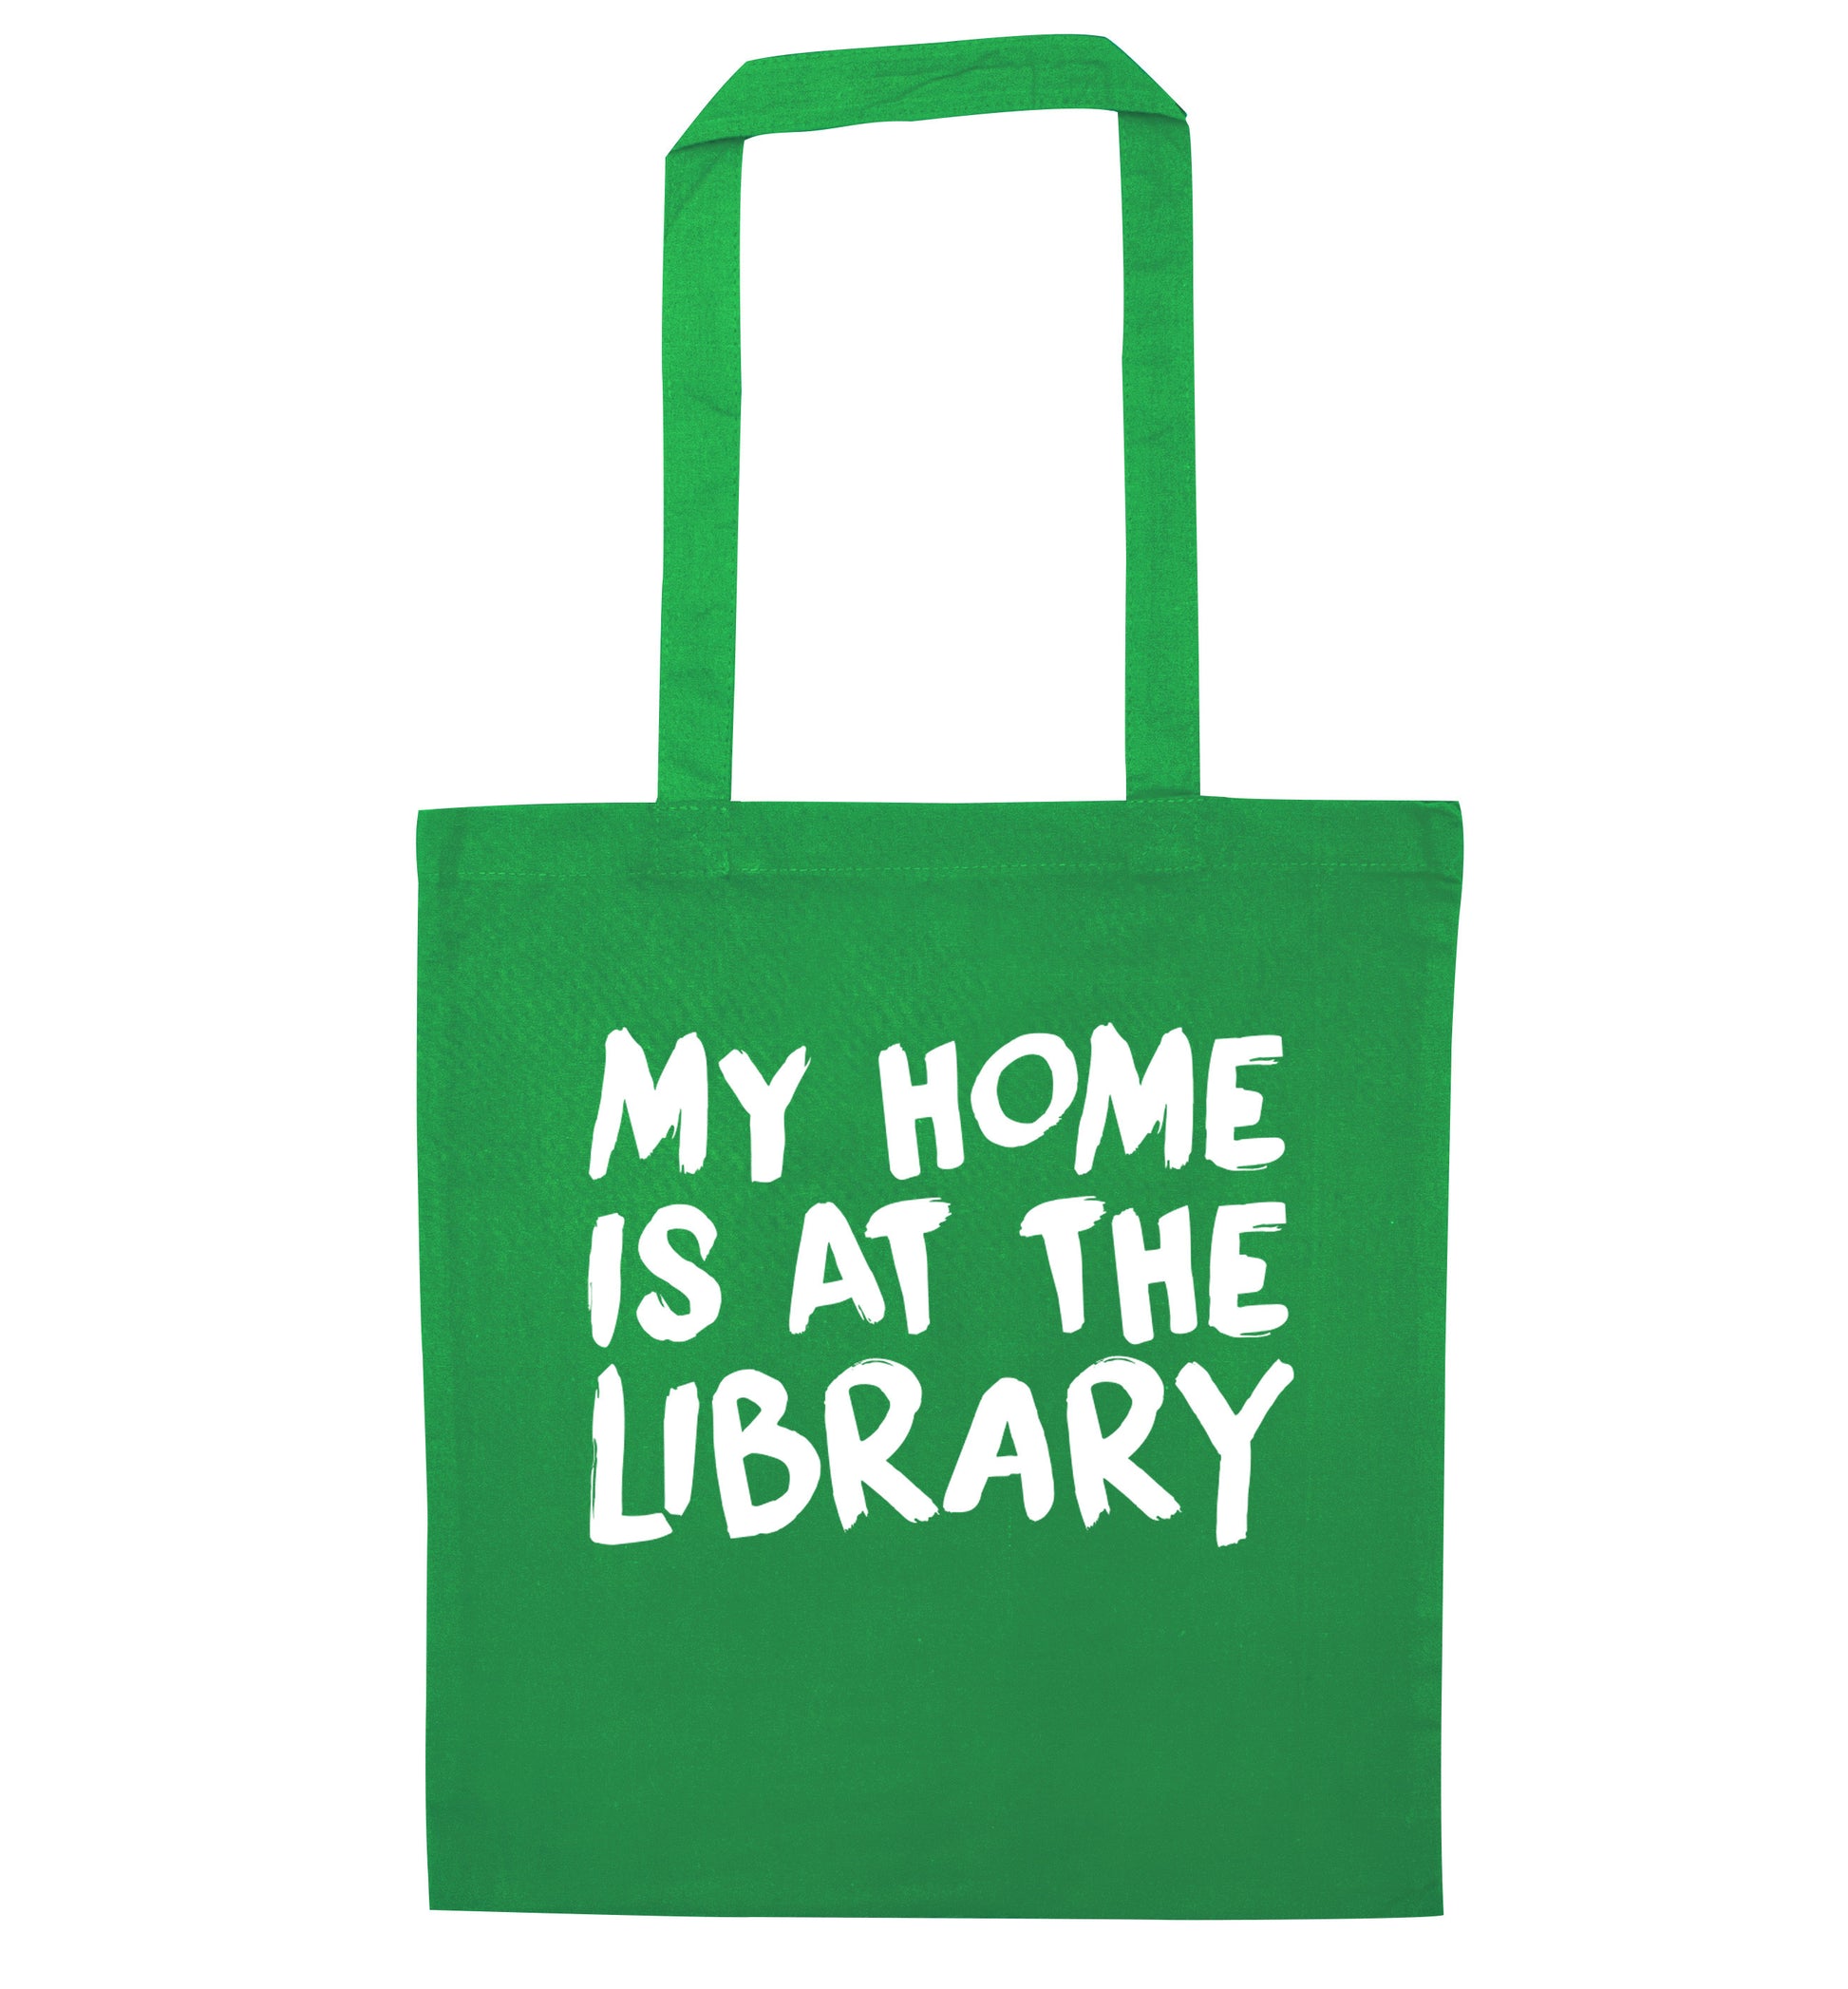 My home is at the library green tote bag